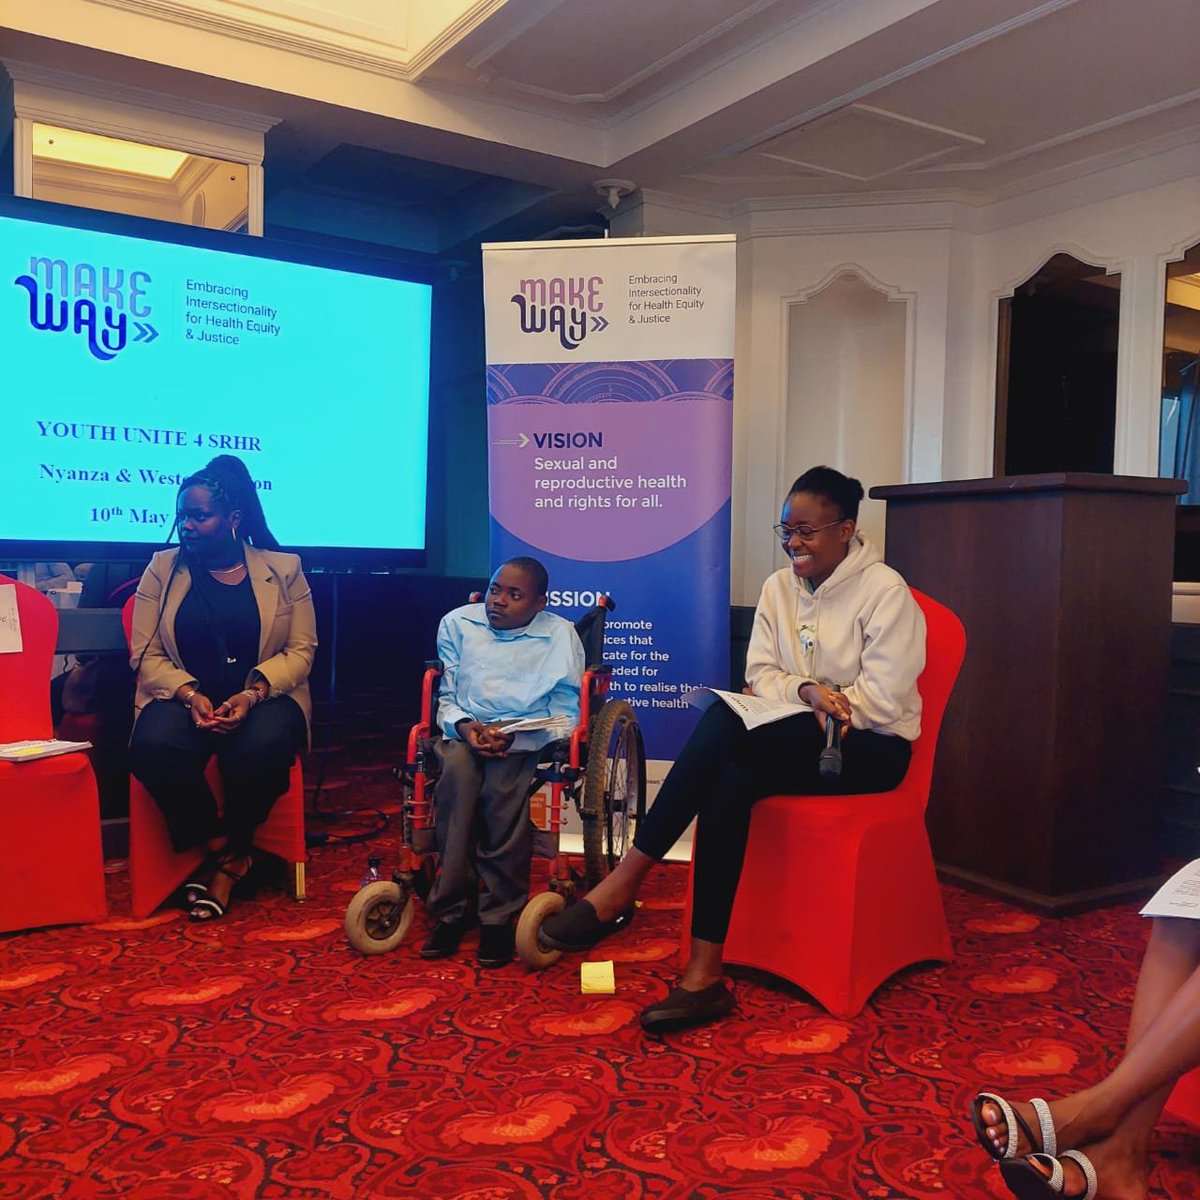 We are proud of our staff, @oduor_Py, for boldly taking part as a panelist in the 'Youth Unite 4 SRHR' meeting convened by Make Way Program, bringing together youth champions from Nyanza and Western regions to share experiences and strategies in SRHR advocacy. @Power2YouthKe